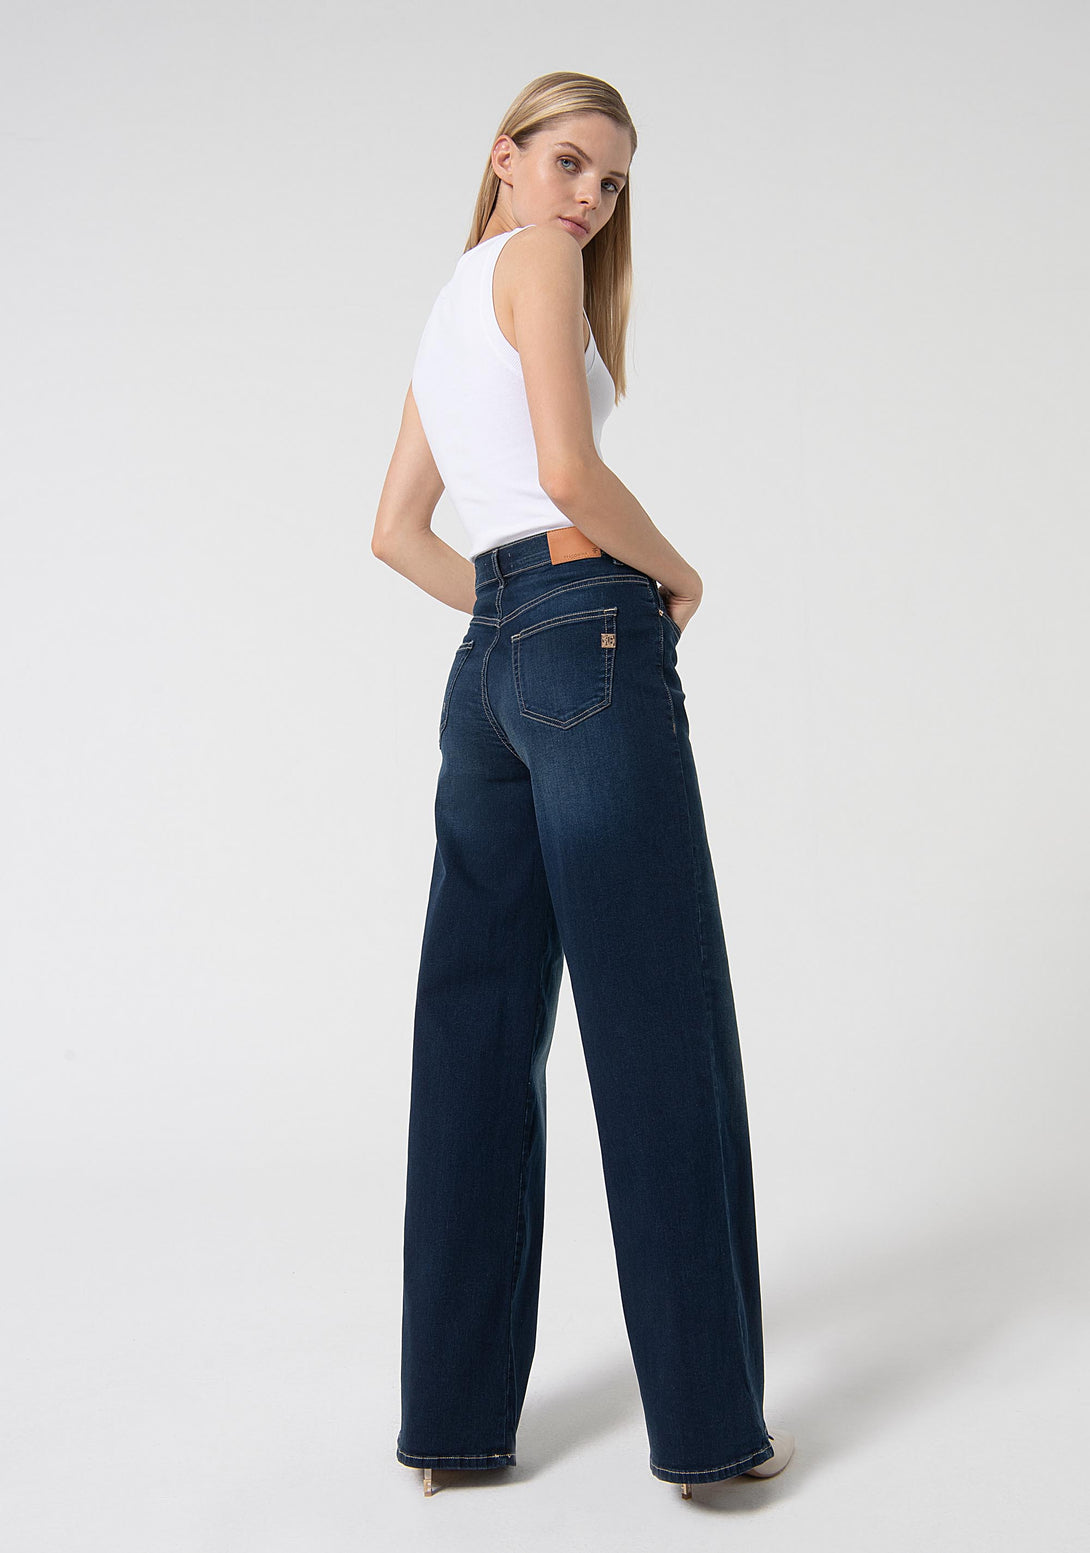 Jeans wide leg made in denim with dark wash Fracomina FP24SV3015D40101-117-3